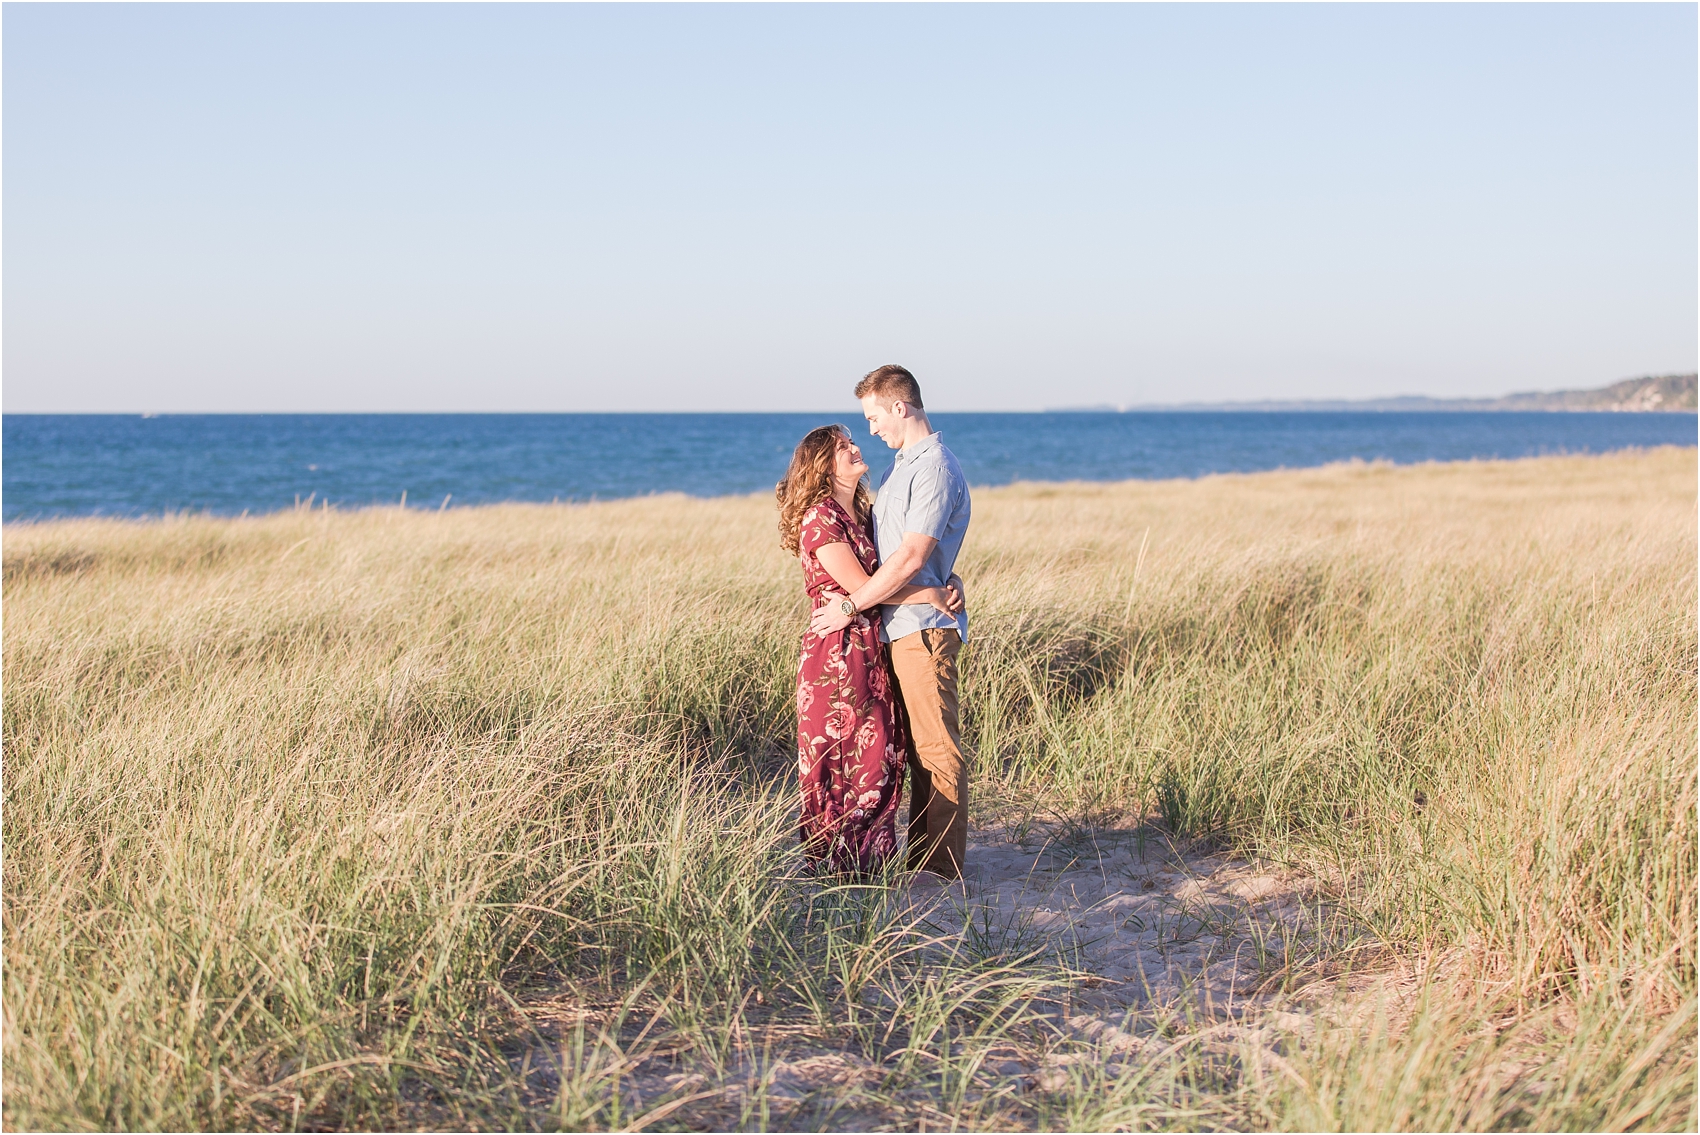 candid-end-of-summer-sunset-engagement-photos-at-silver-beach-in-st-joseph-mi-by-courtney-carolyn-photography_0023.jpg